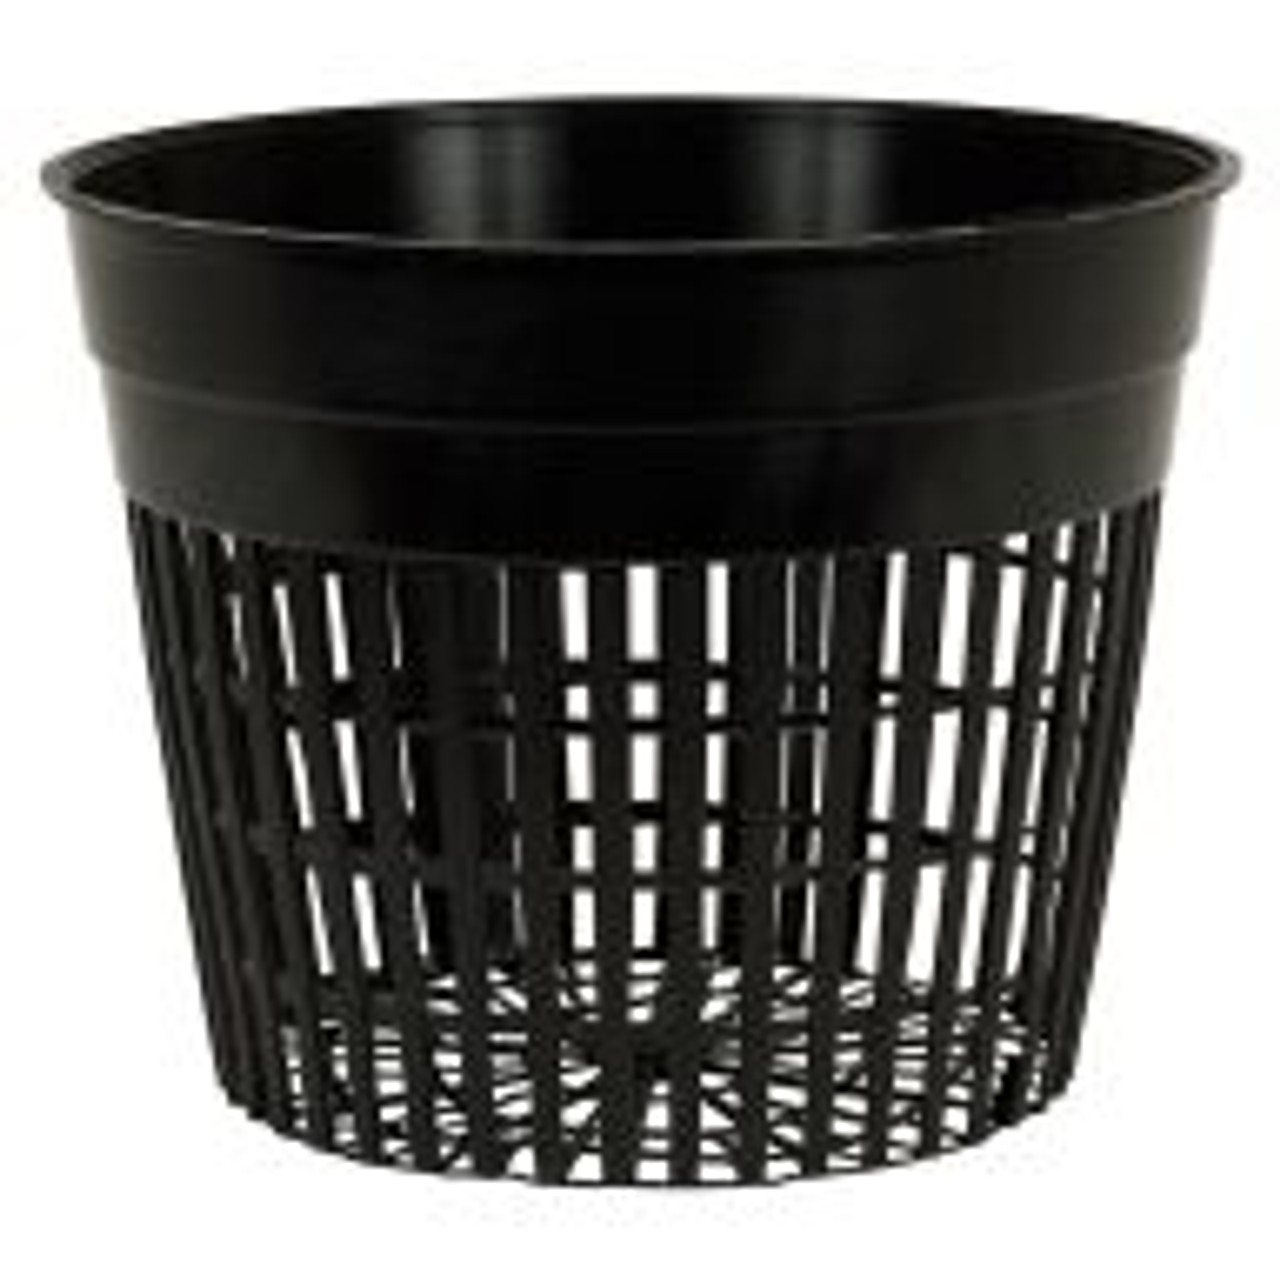 These sturdy 5" Flex Net Pots are fantastic for propagating seedlings and cuttings and will accommodate most types of media. Gardeners can insert them into their pre-fab or customized hydroponics system for premium performance.